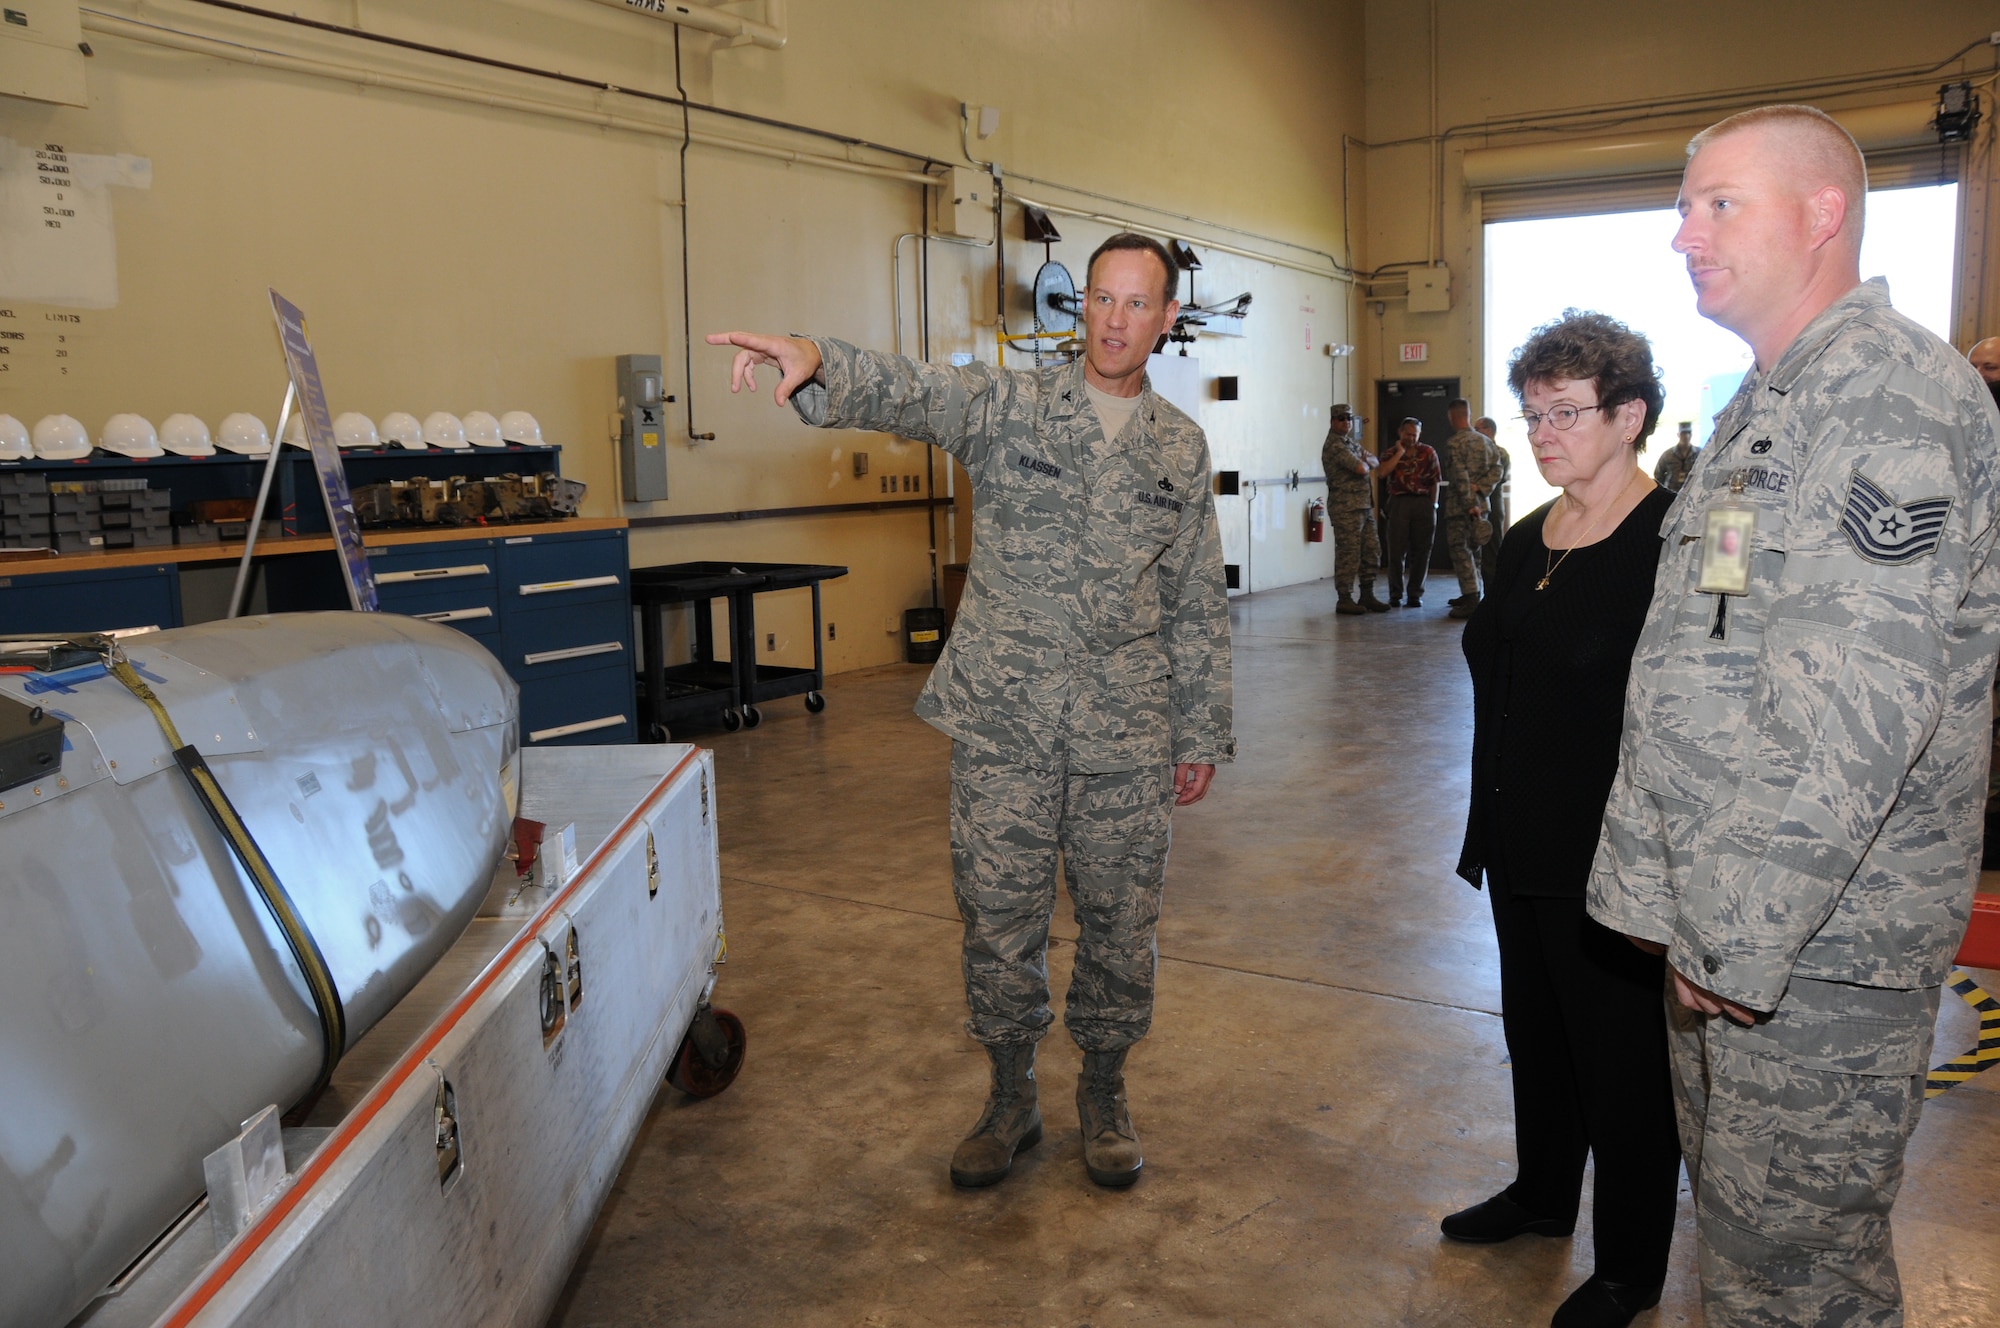 ANDERSEN AIR FORCE BASE, Guam - Col. Brett Klassen, 36th Maintenance Group commander explains the capabilities of the Conventional Air Launch Cruise Missile to Mrs. Natalie Crawford, Senior Fellow of the Research and Development Corporation and Senior Mentor for the U.S. Air Force Scientific Advisory Board during her visit here Dec.17.  Andersen has had a continuous bomber presence with bombers capable of delivering precision missiles such as the CALCM since 2004. (U.S. Air Force photo by Senior Airman Nichelle Griffiths)